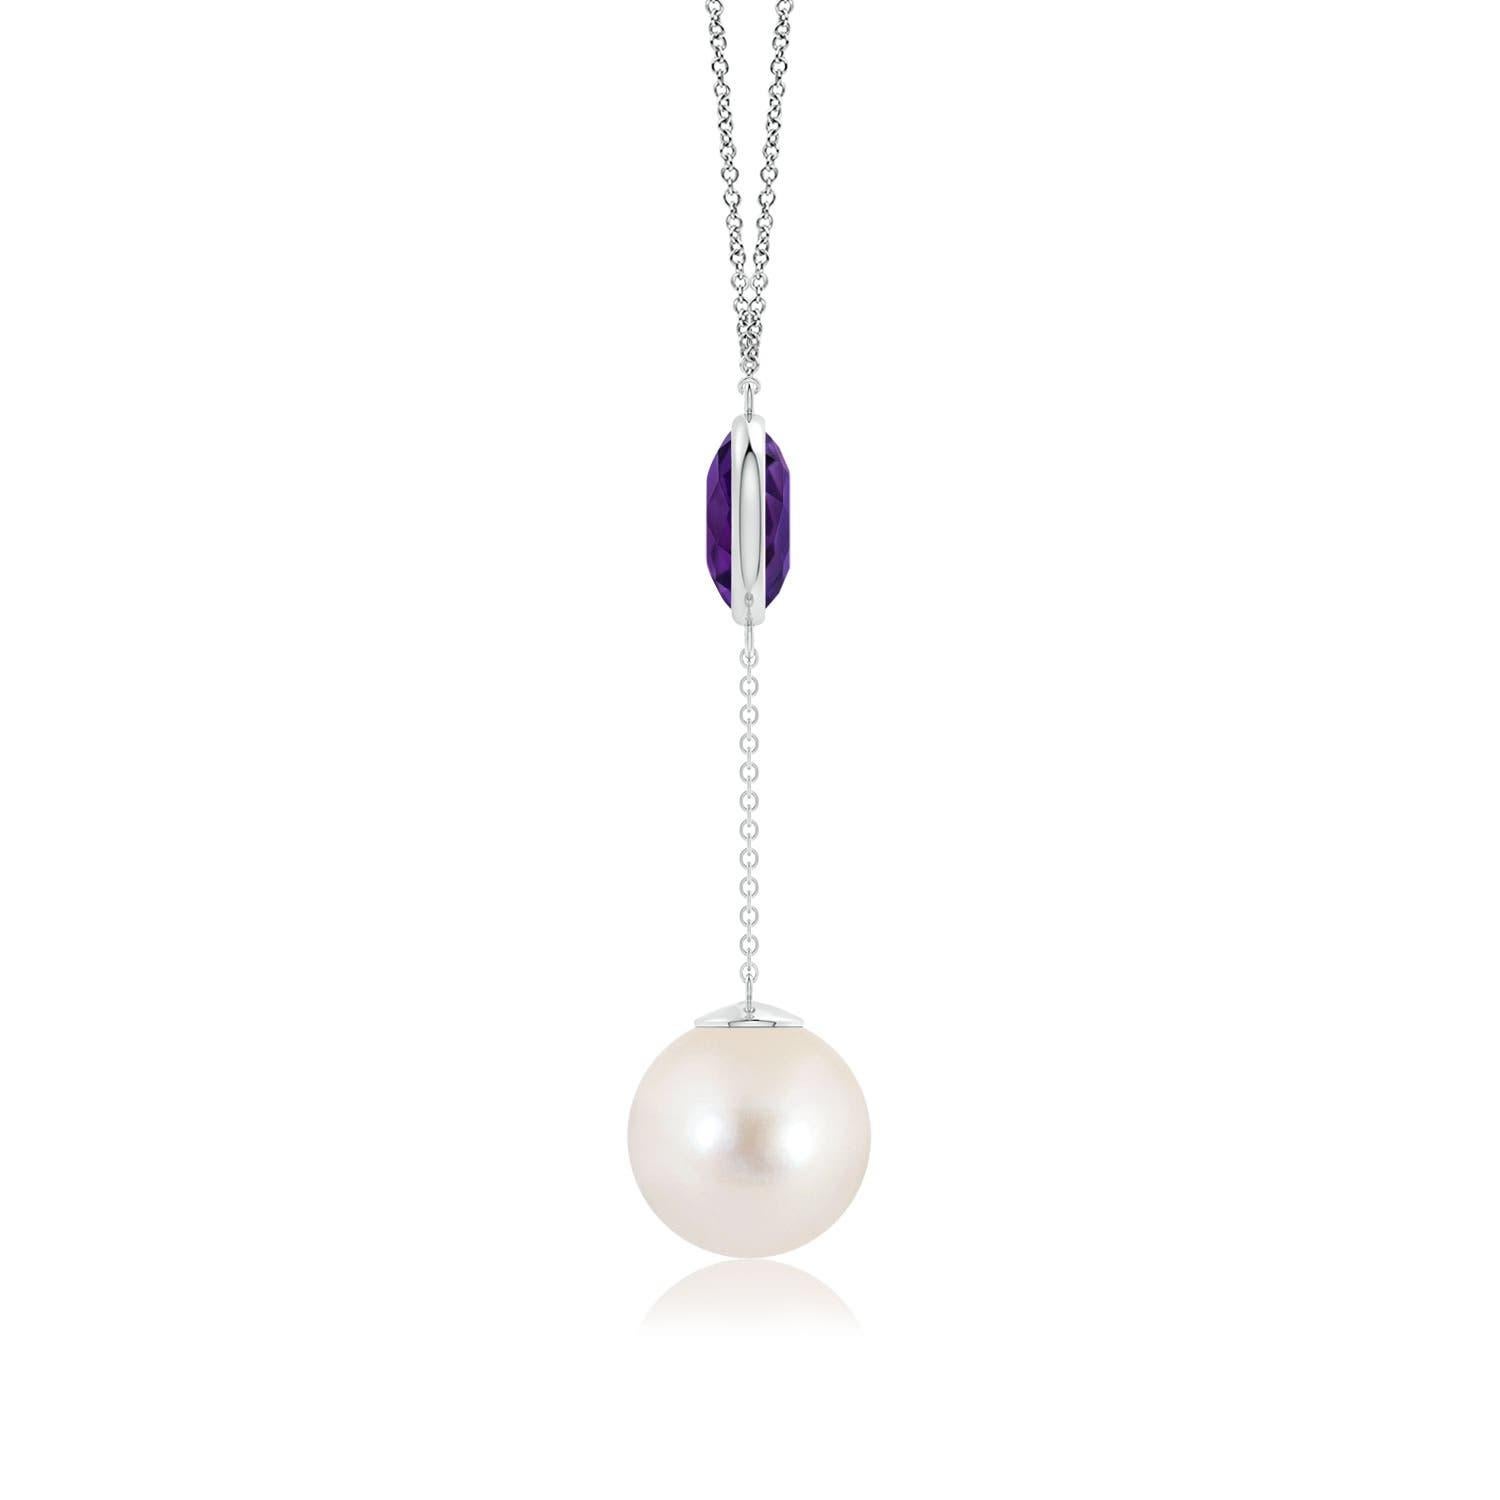 Cabochon Freshwater Cultured Pearl & 2.85ct Amethyst Lariat Necklace in 14K White Gold For Sale